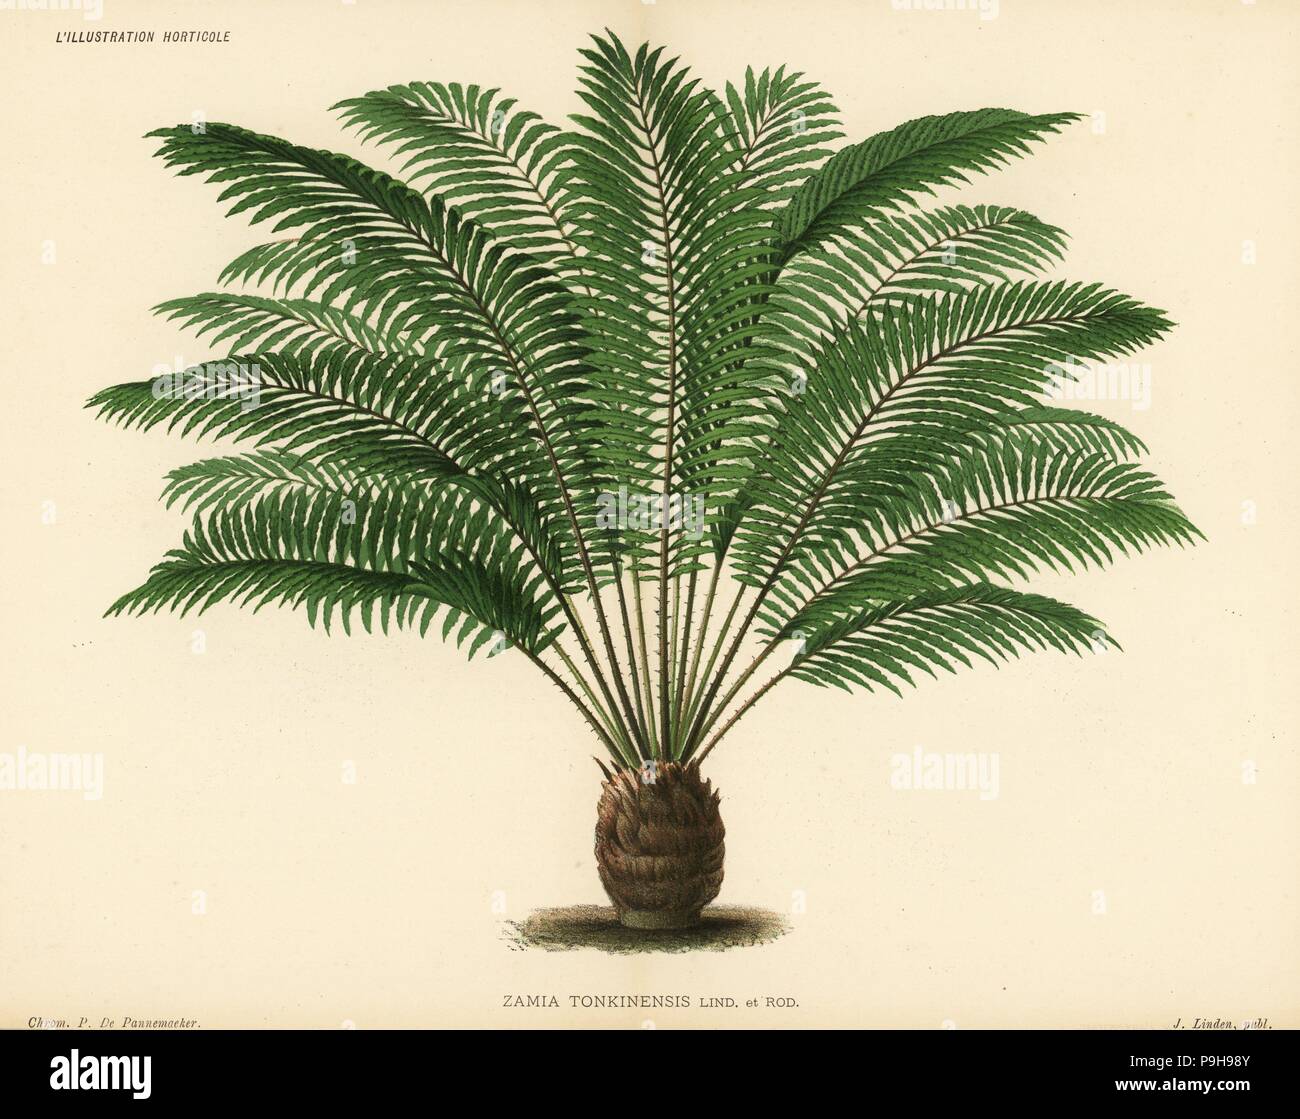 Zamia tonkinensis. Chromolithograph by Pieter de Pannemaeker from Jean Linden's l'Illustration Horticole, Brussels, 1885. Stock Photo